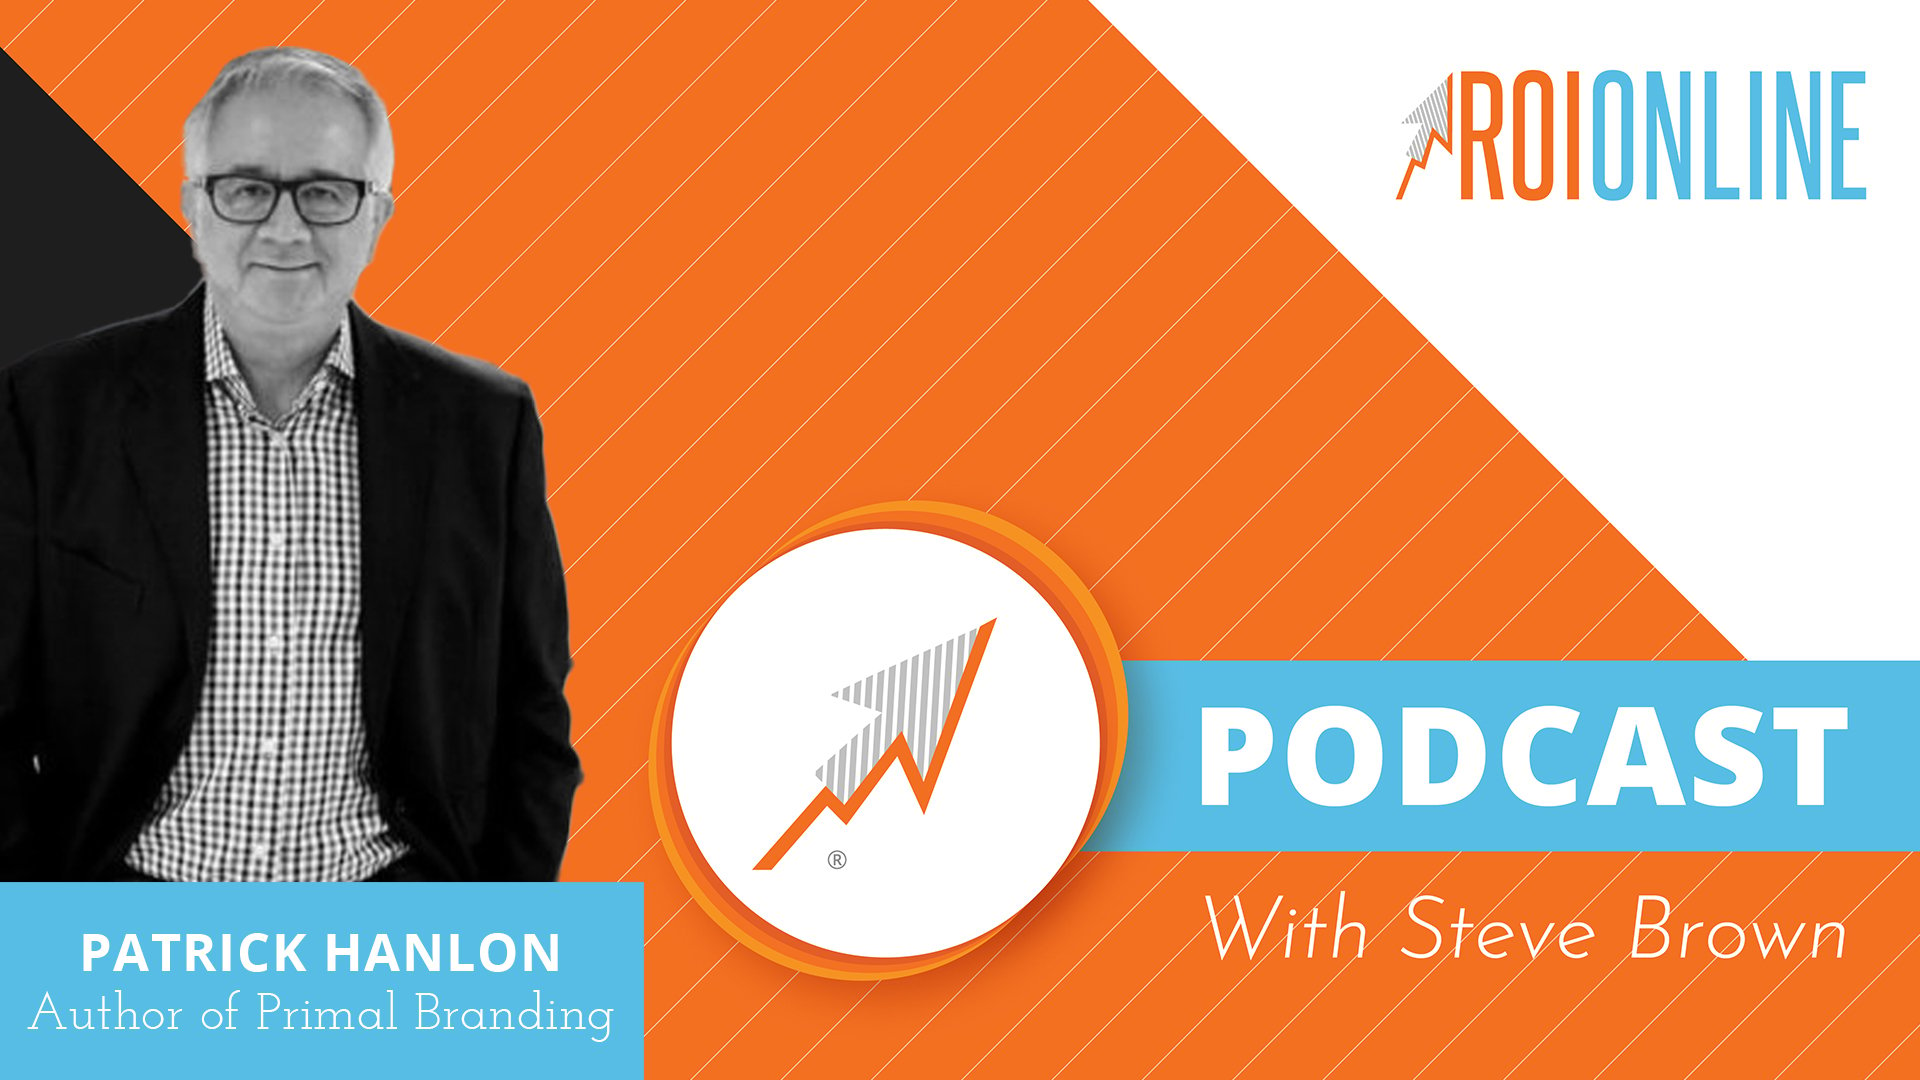 The-ROI-Online-Podcast-With-Patrick-Hanlon-Author-of-Primal-Branding-podcast-graphic